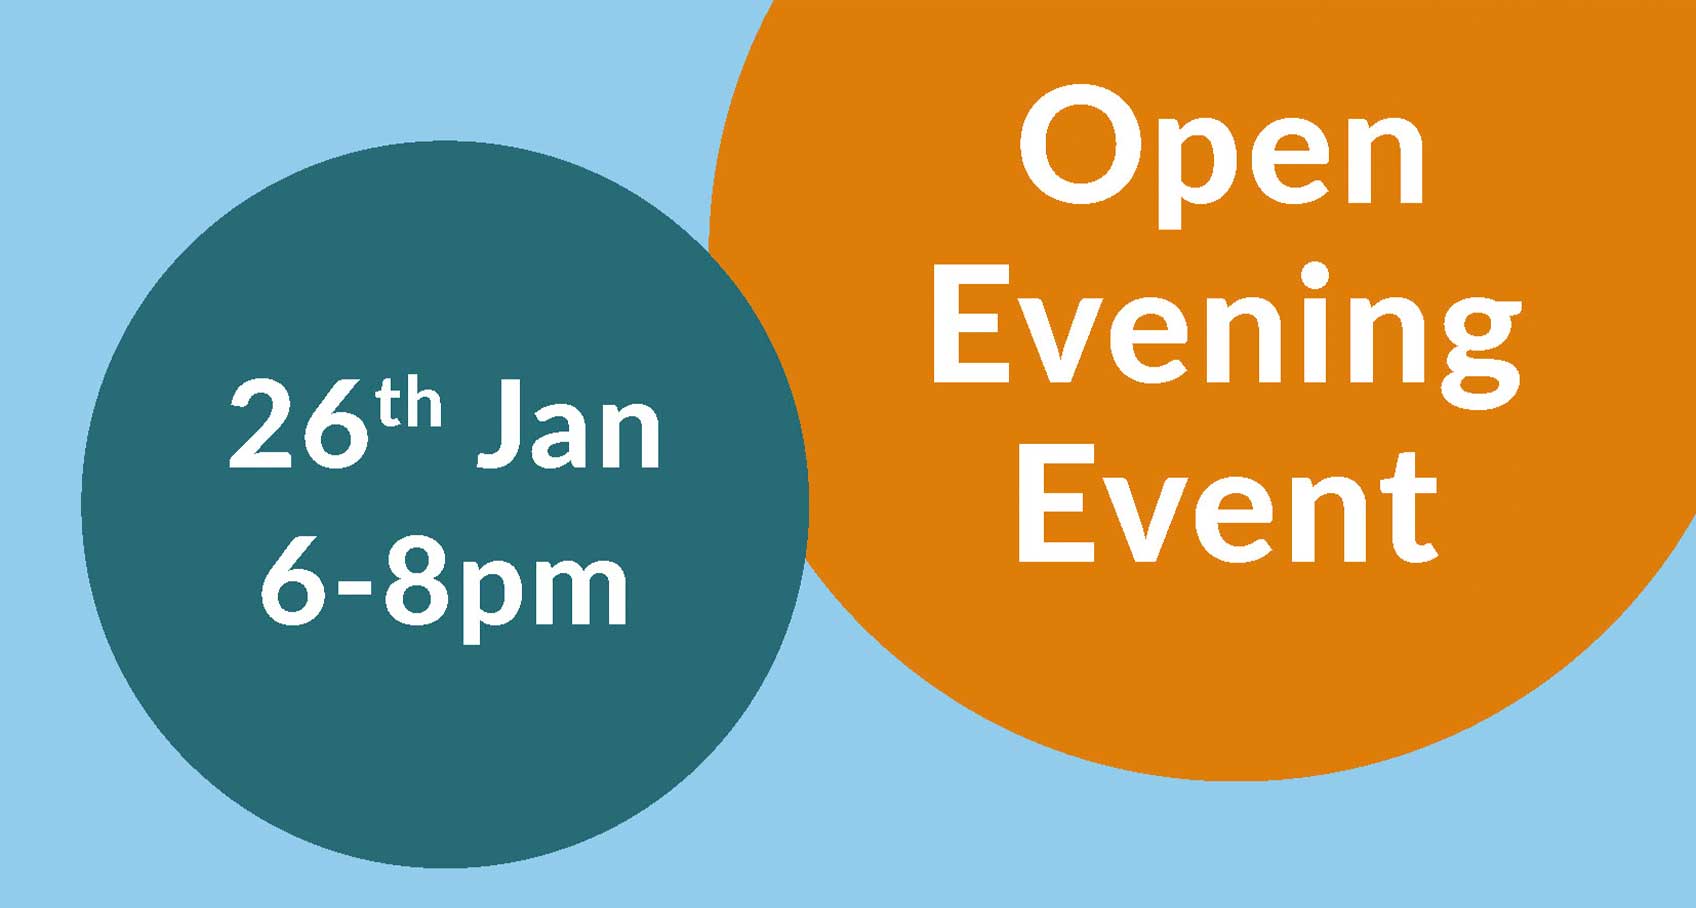 You're invited - Open Evening Event